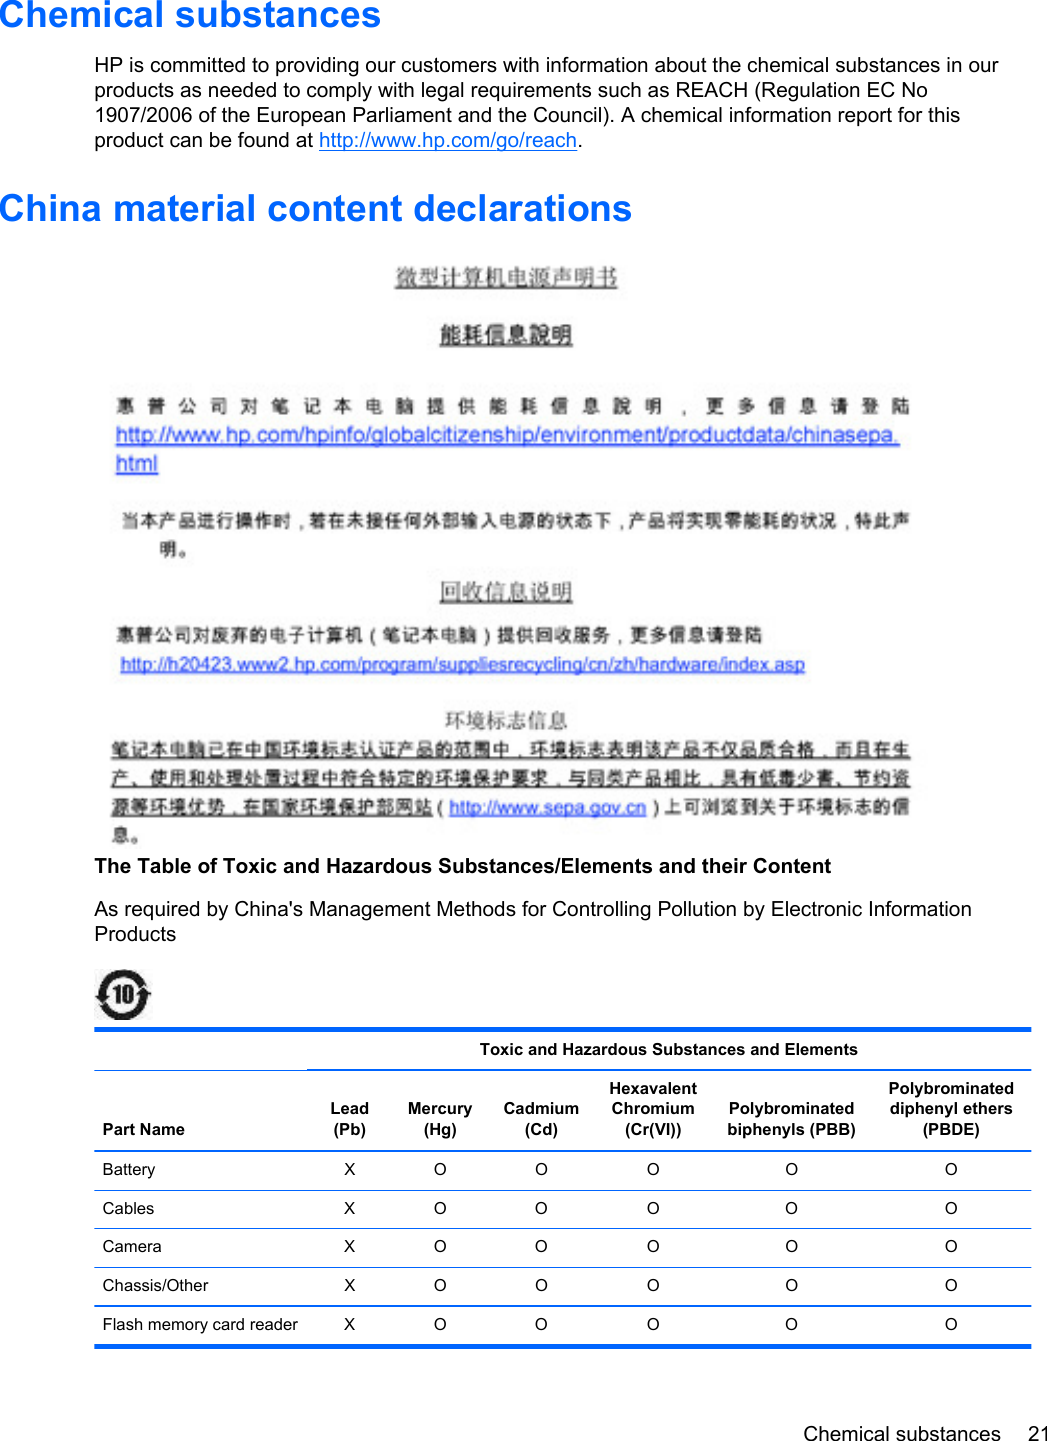 Chemical substancesHP is committed to providing our customers with information about the chemical substances in ourproducts as needed to comply with legal requirements such as REACH (Regulation EC No1907/2006 of the European Parliament and the Council). A chemical information report for thisproduct can be found at http://www.hp.com/go/reach.China material content declarationsThe Table of Toxic and Hazardous Substances/Elements and their ContentAs required by China&apos;s Management Methods for Controlling Pollution by Electronic InformationProducts  Toxic and Hazardous Substances and ElementsPart NameLead(Pb)Mercury(Hg)Cadmium(Cd)HexavalentChromium(Cr(VI))Polybrominatedbiphenyls (PBB)Polybrominateddiphenyl ethers(PBDE)Battery X O O O O OCables X O O O O OCamera X O O O O OChassis/Other X O O O O OFlash memory card reader X O O O O OChemical substances 21